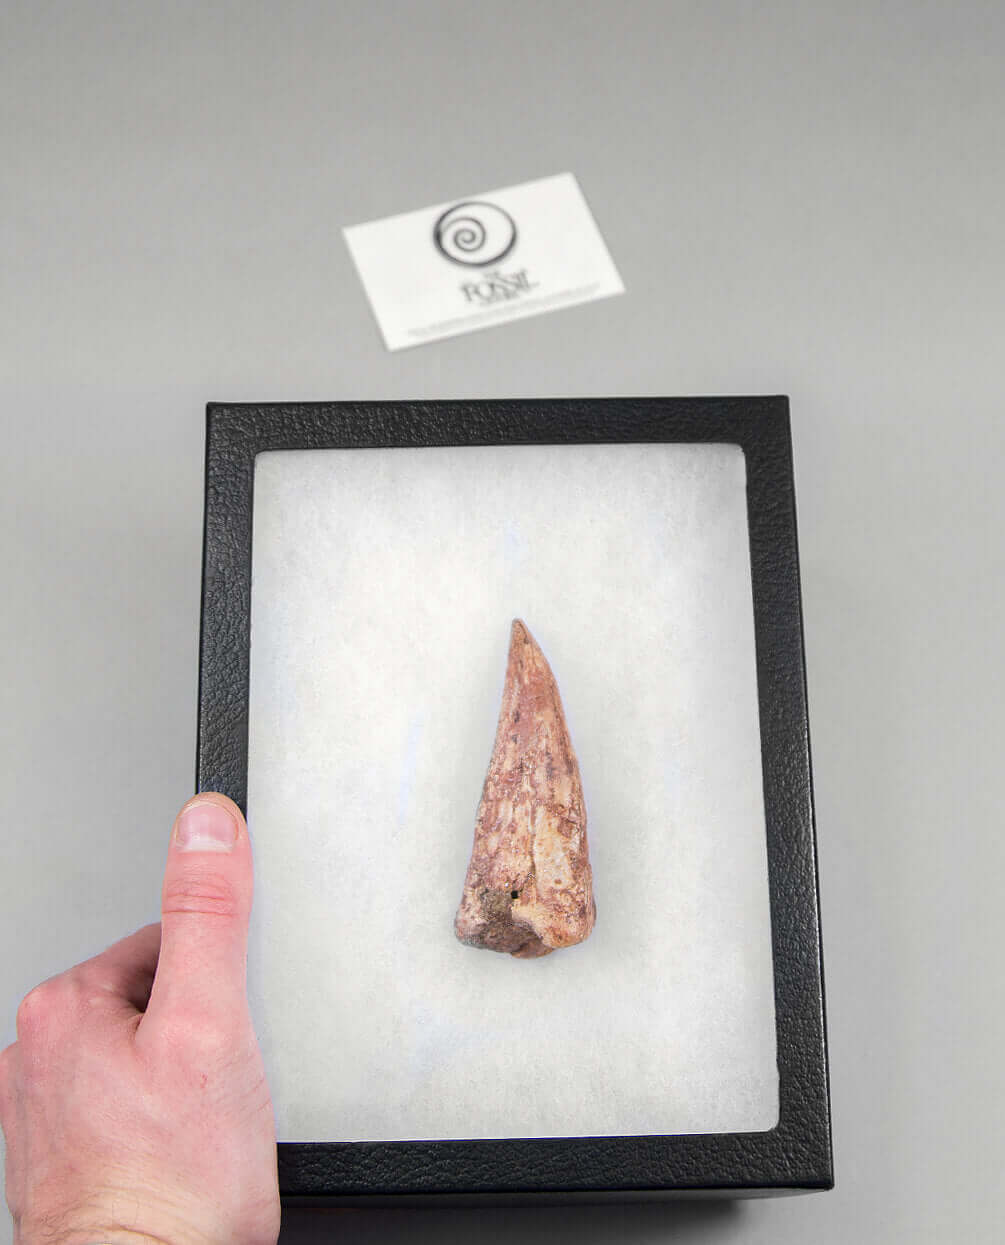 Scientifically important Spinosaurus aegyptiacus dinosaur fossil toe claw for sale measuring 91mm at THE FOSSIL STORE